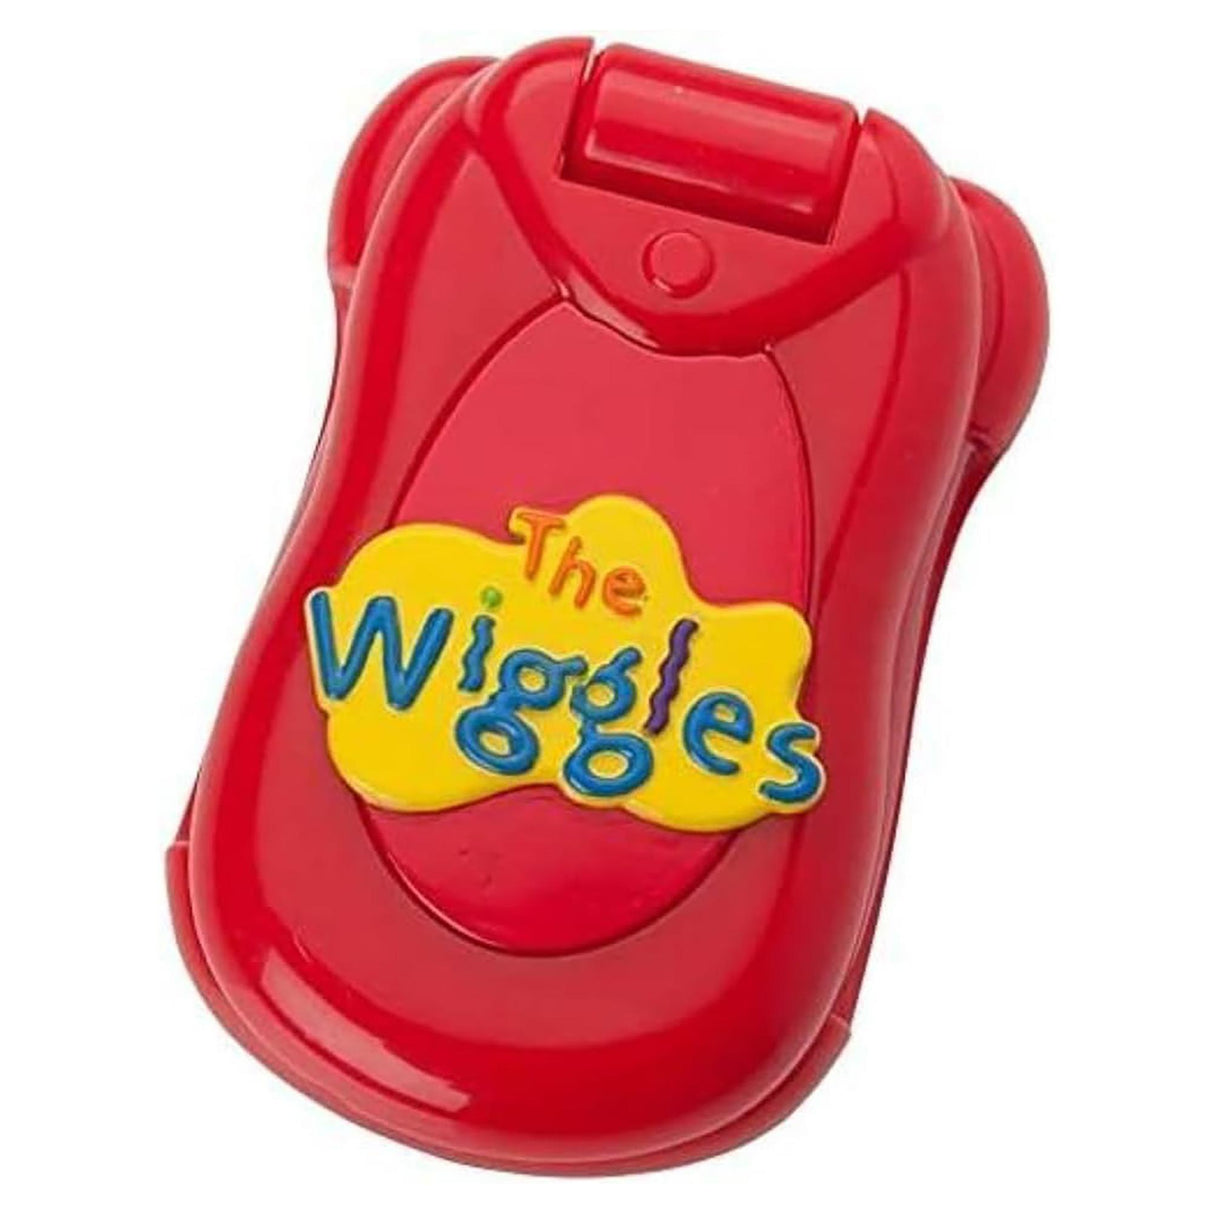 The Wiggles Flip and Learn Phone